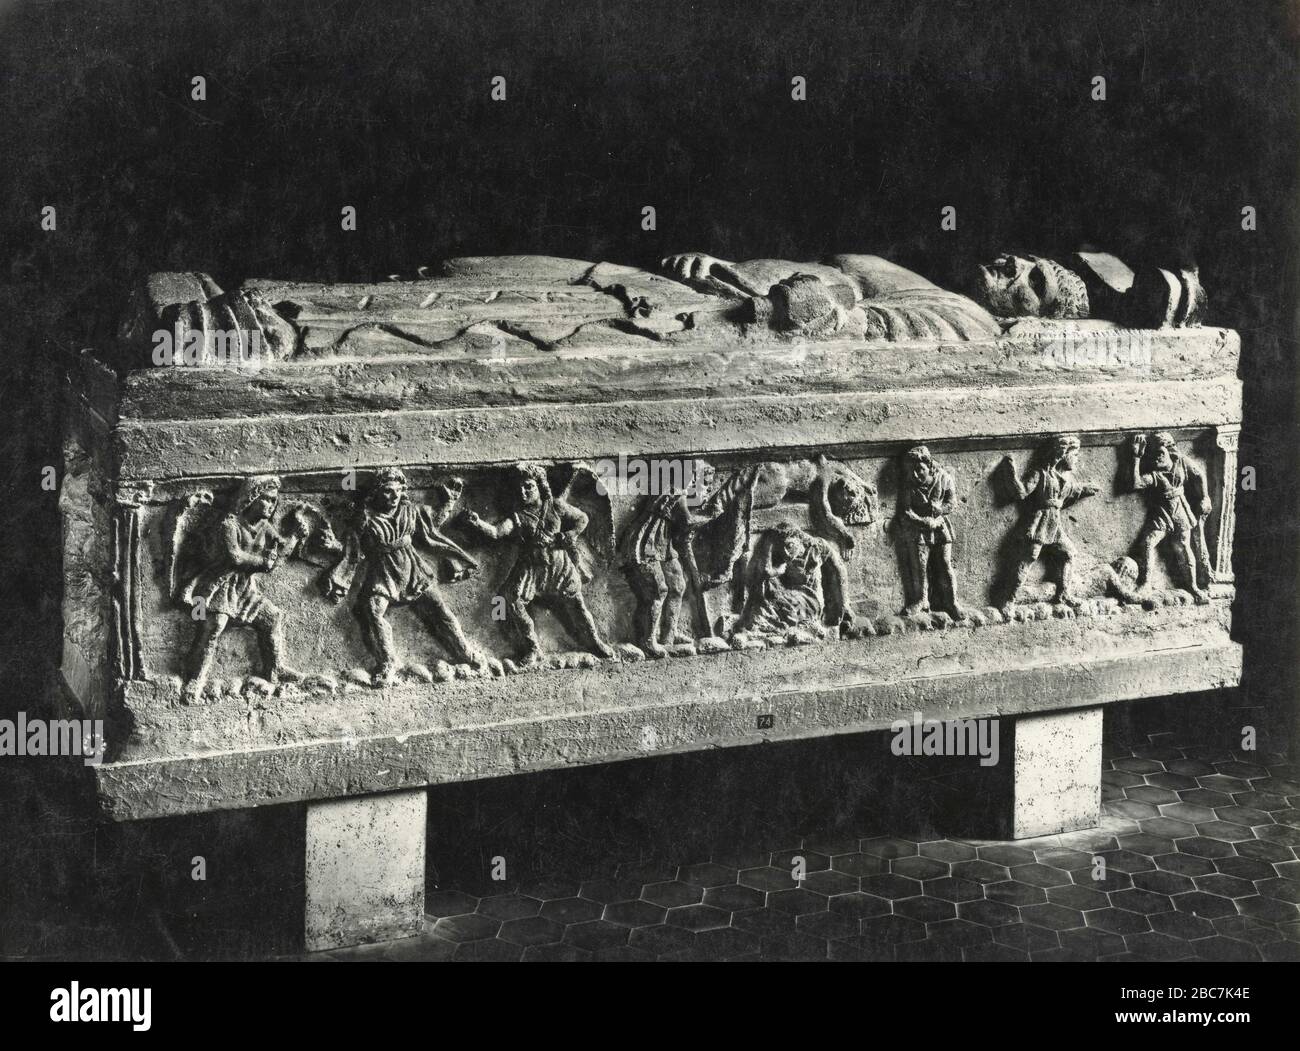 Sarcophagus with Trojan and Theban myths scenes, Vatican Museums, Rome, Italy 1920s Stock Photo